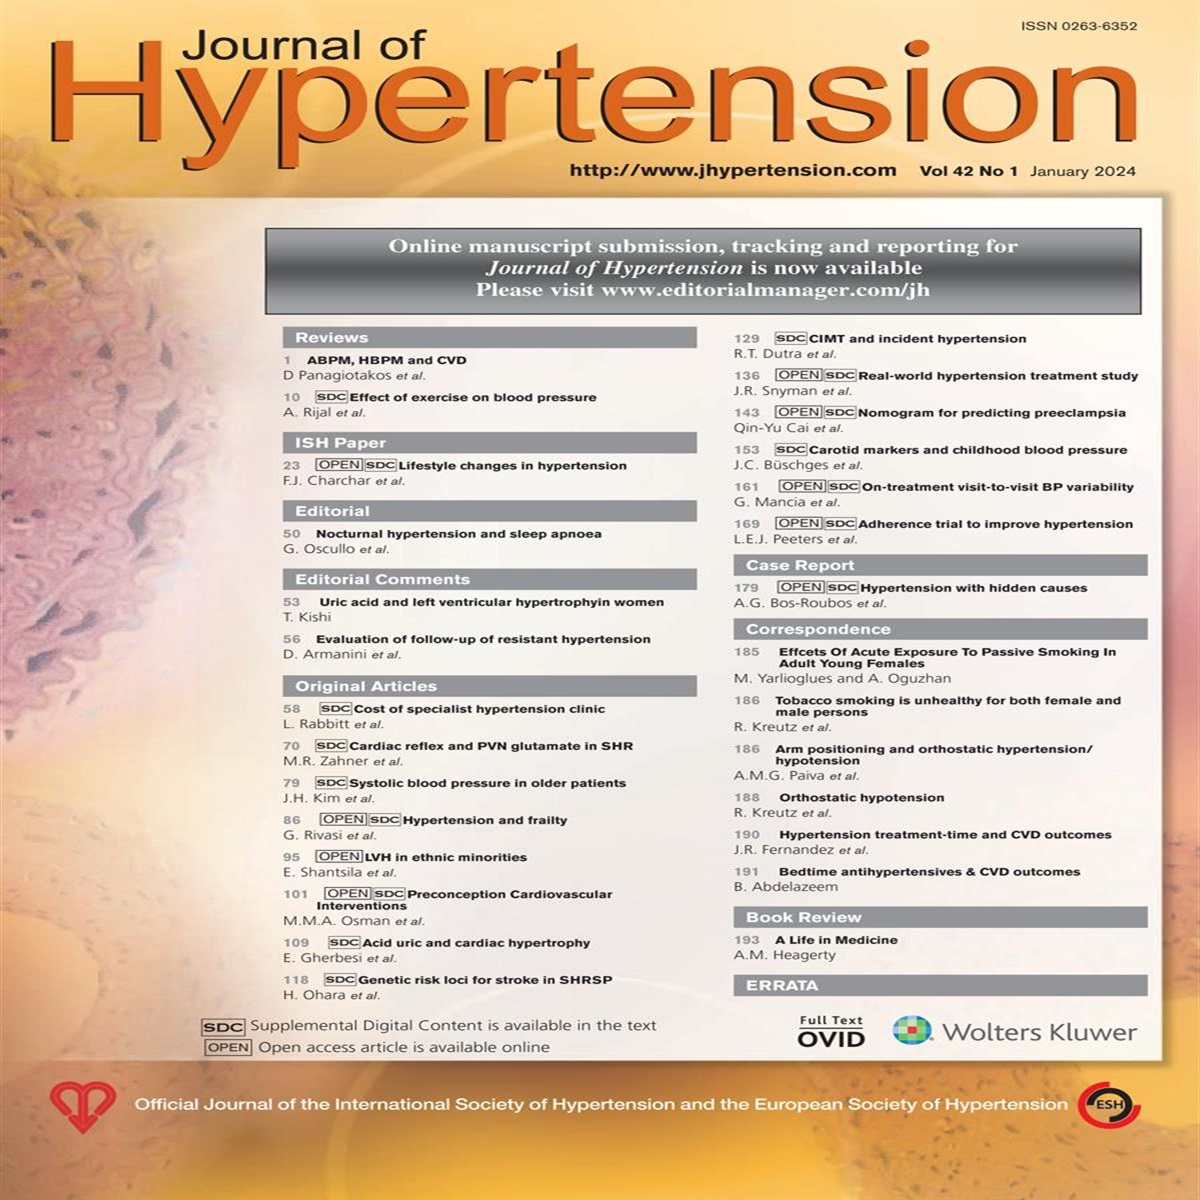 Impact of hypertension treatment-time on cardiovascular outcomes: erroneous trial selection leading to suspect findings